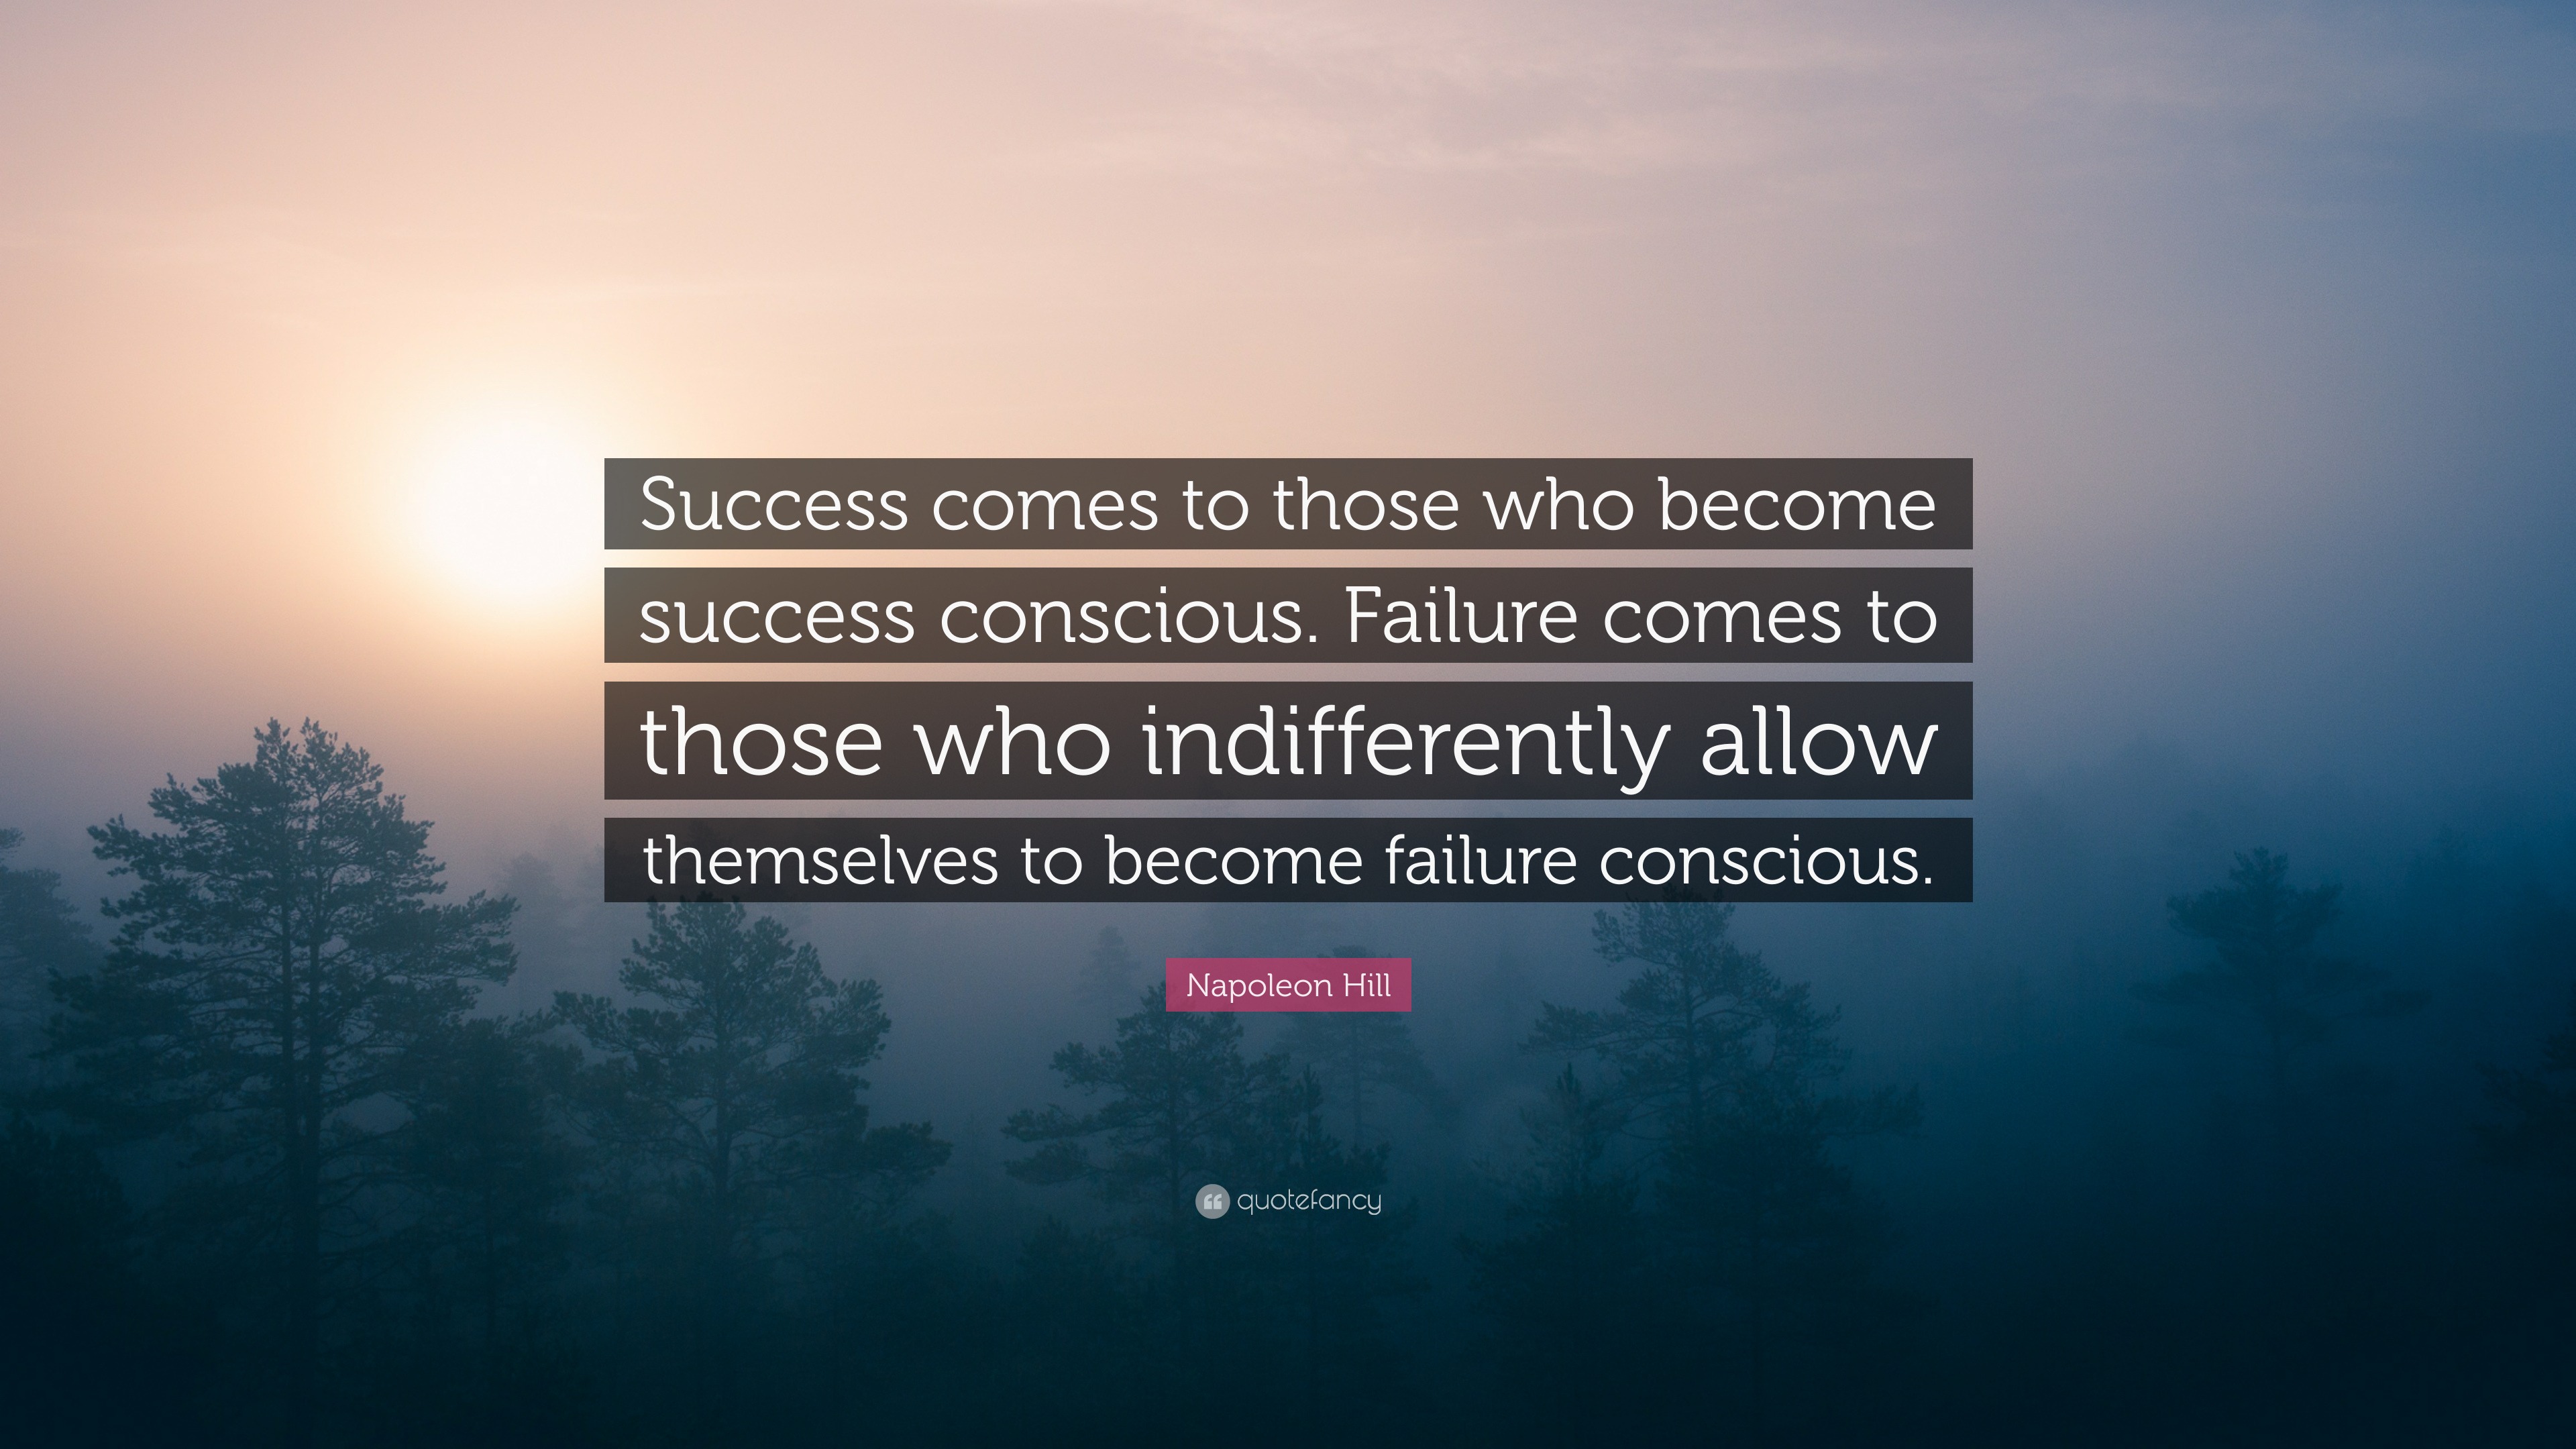 Napoleon Hill Quote: “Success comes to those who become success conscious.  Failure comes to those who indifferently allow themselves to become”